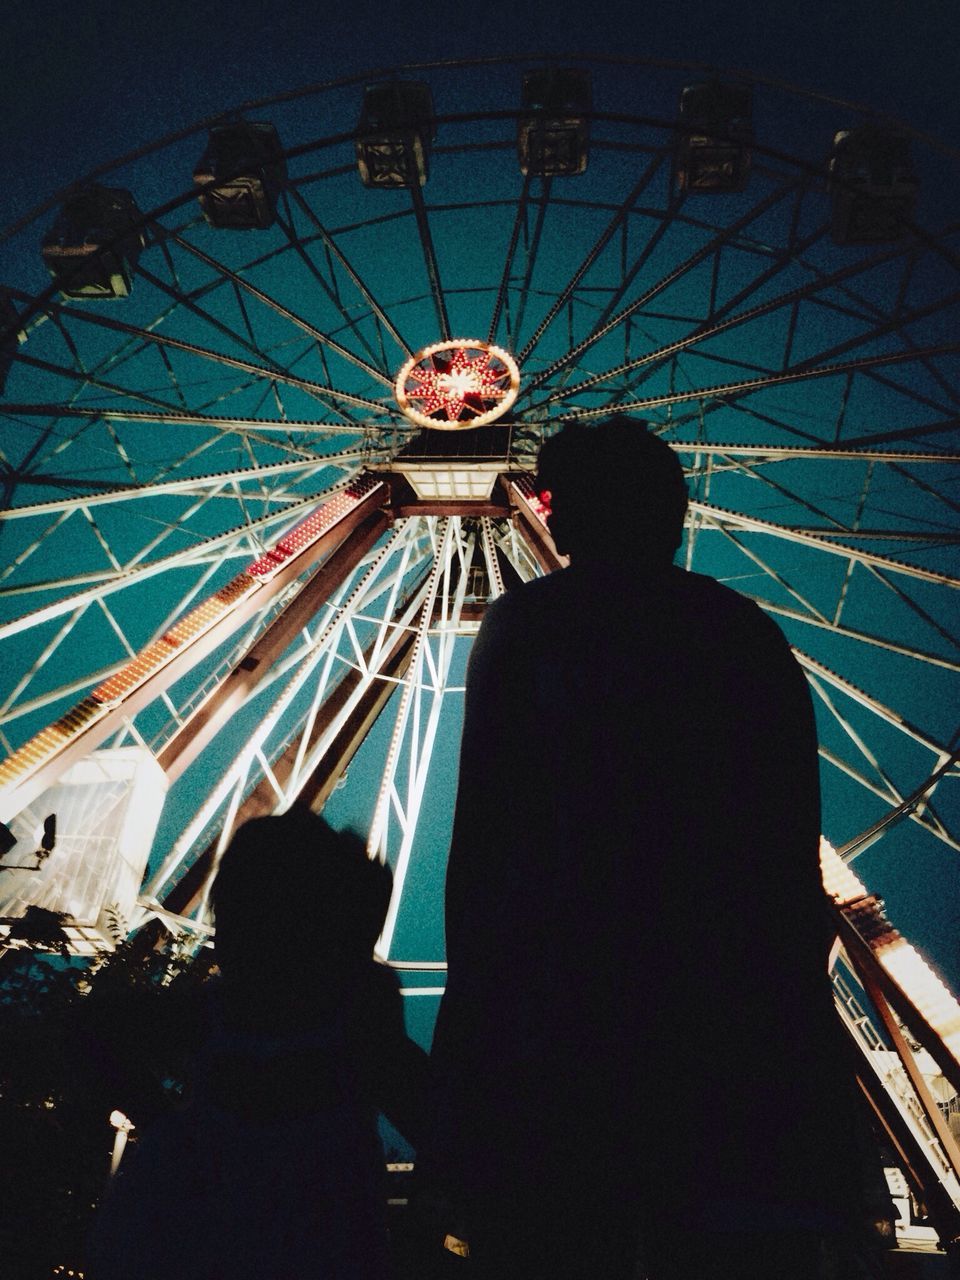 arts culture and entertainment, amusement park, amusement park ride, low angle view, leisure activity, ferris wheel, illuminated, lifestyles, fun, enjoyment, men, night, sky, person, built structure, silhouette, large group of people, traveling carnival, indoors